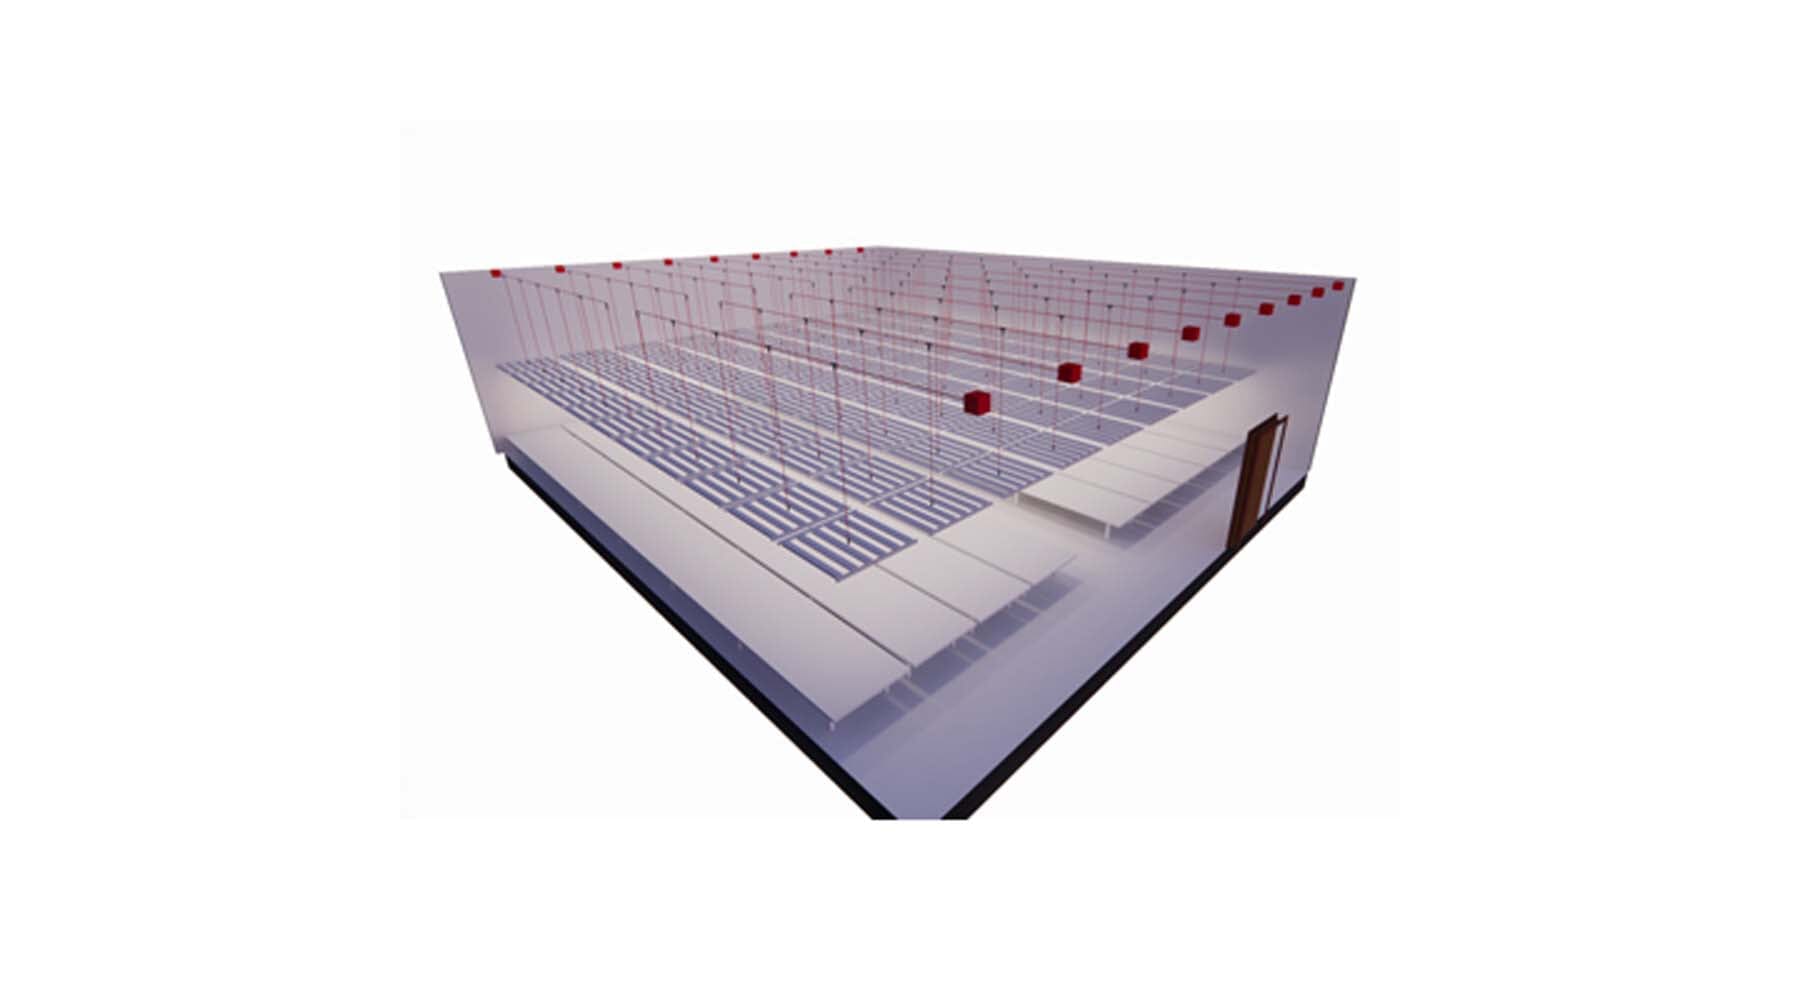 LED Grow Light Design In A Cultivation Facility